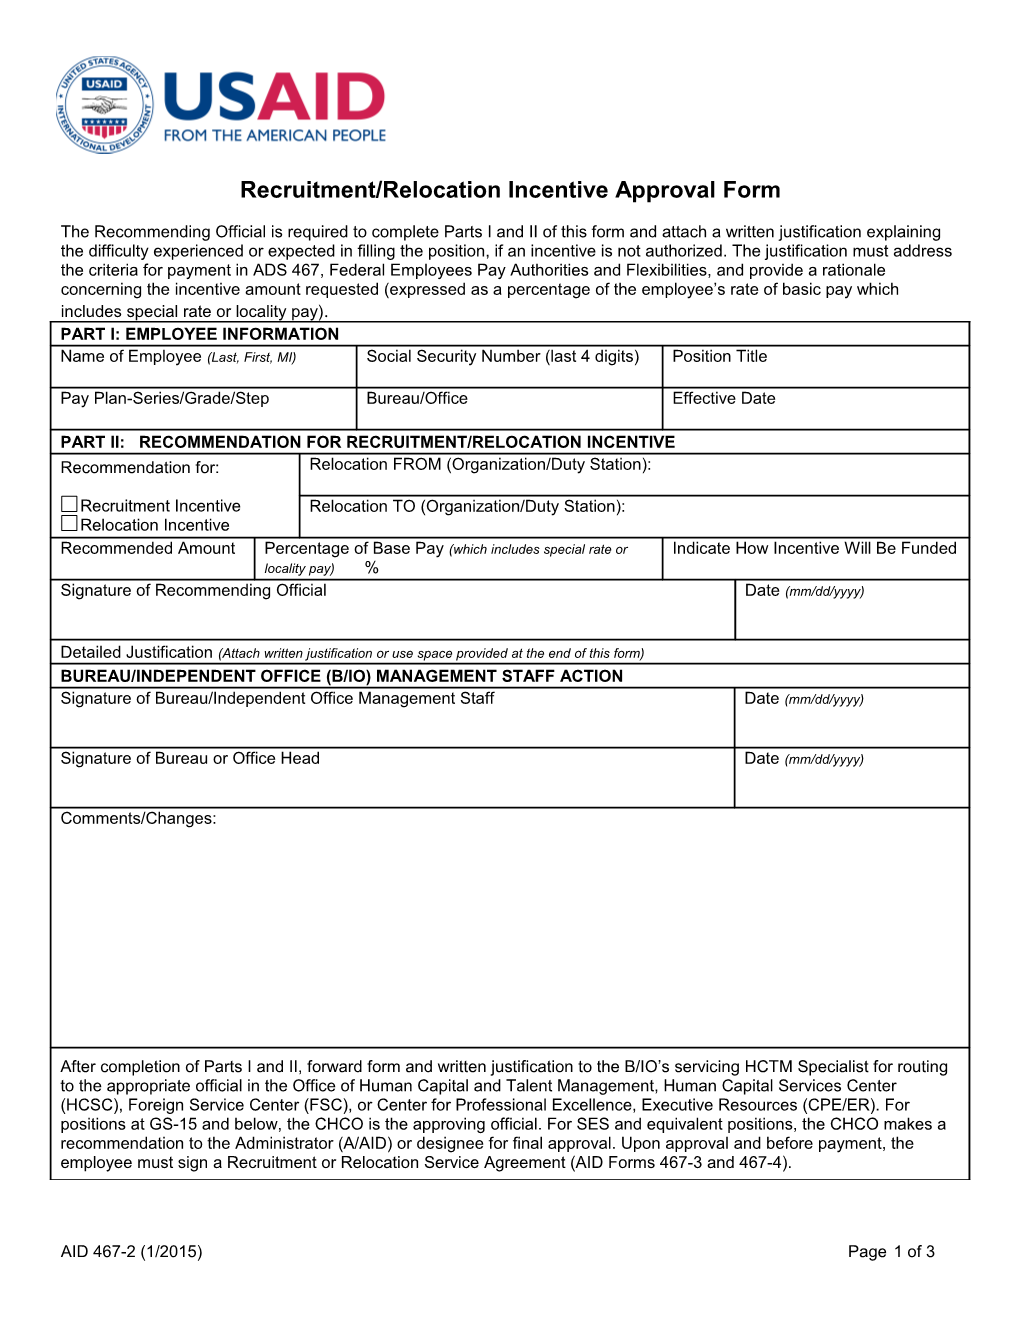 Recruitment/Relocation Incentive Approval Form